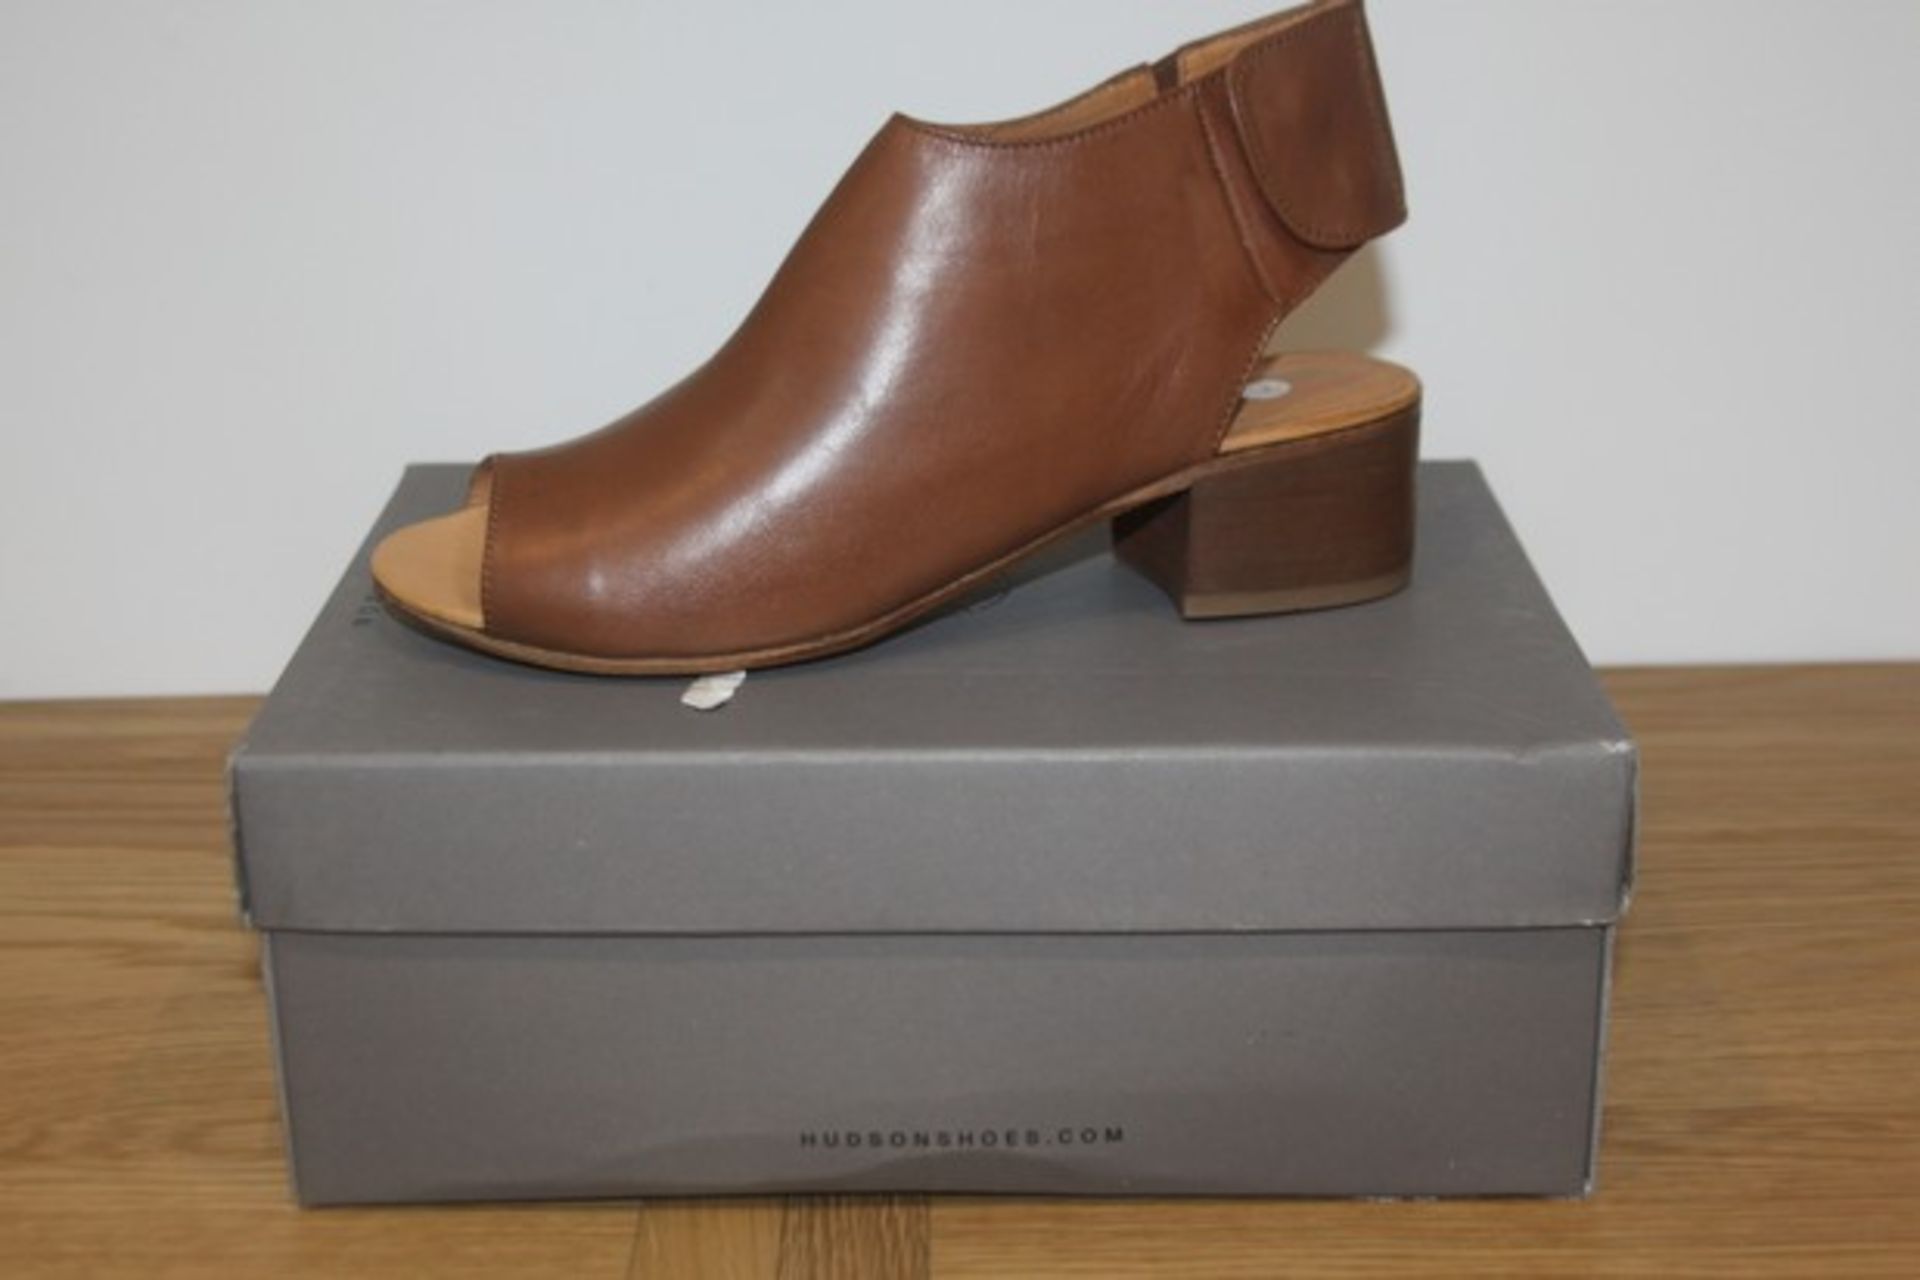 BOXED BRAND NEW HUDSON SHOES SIZE 6 RRP £90 (DSSALVAGE)